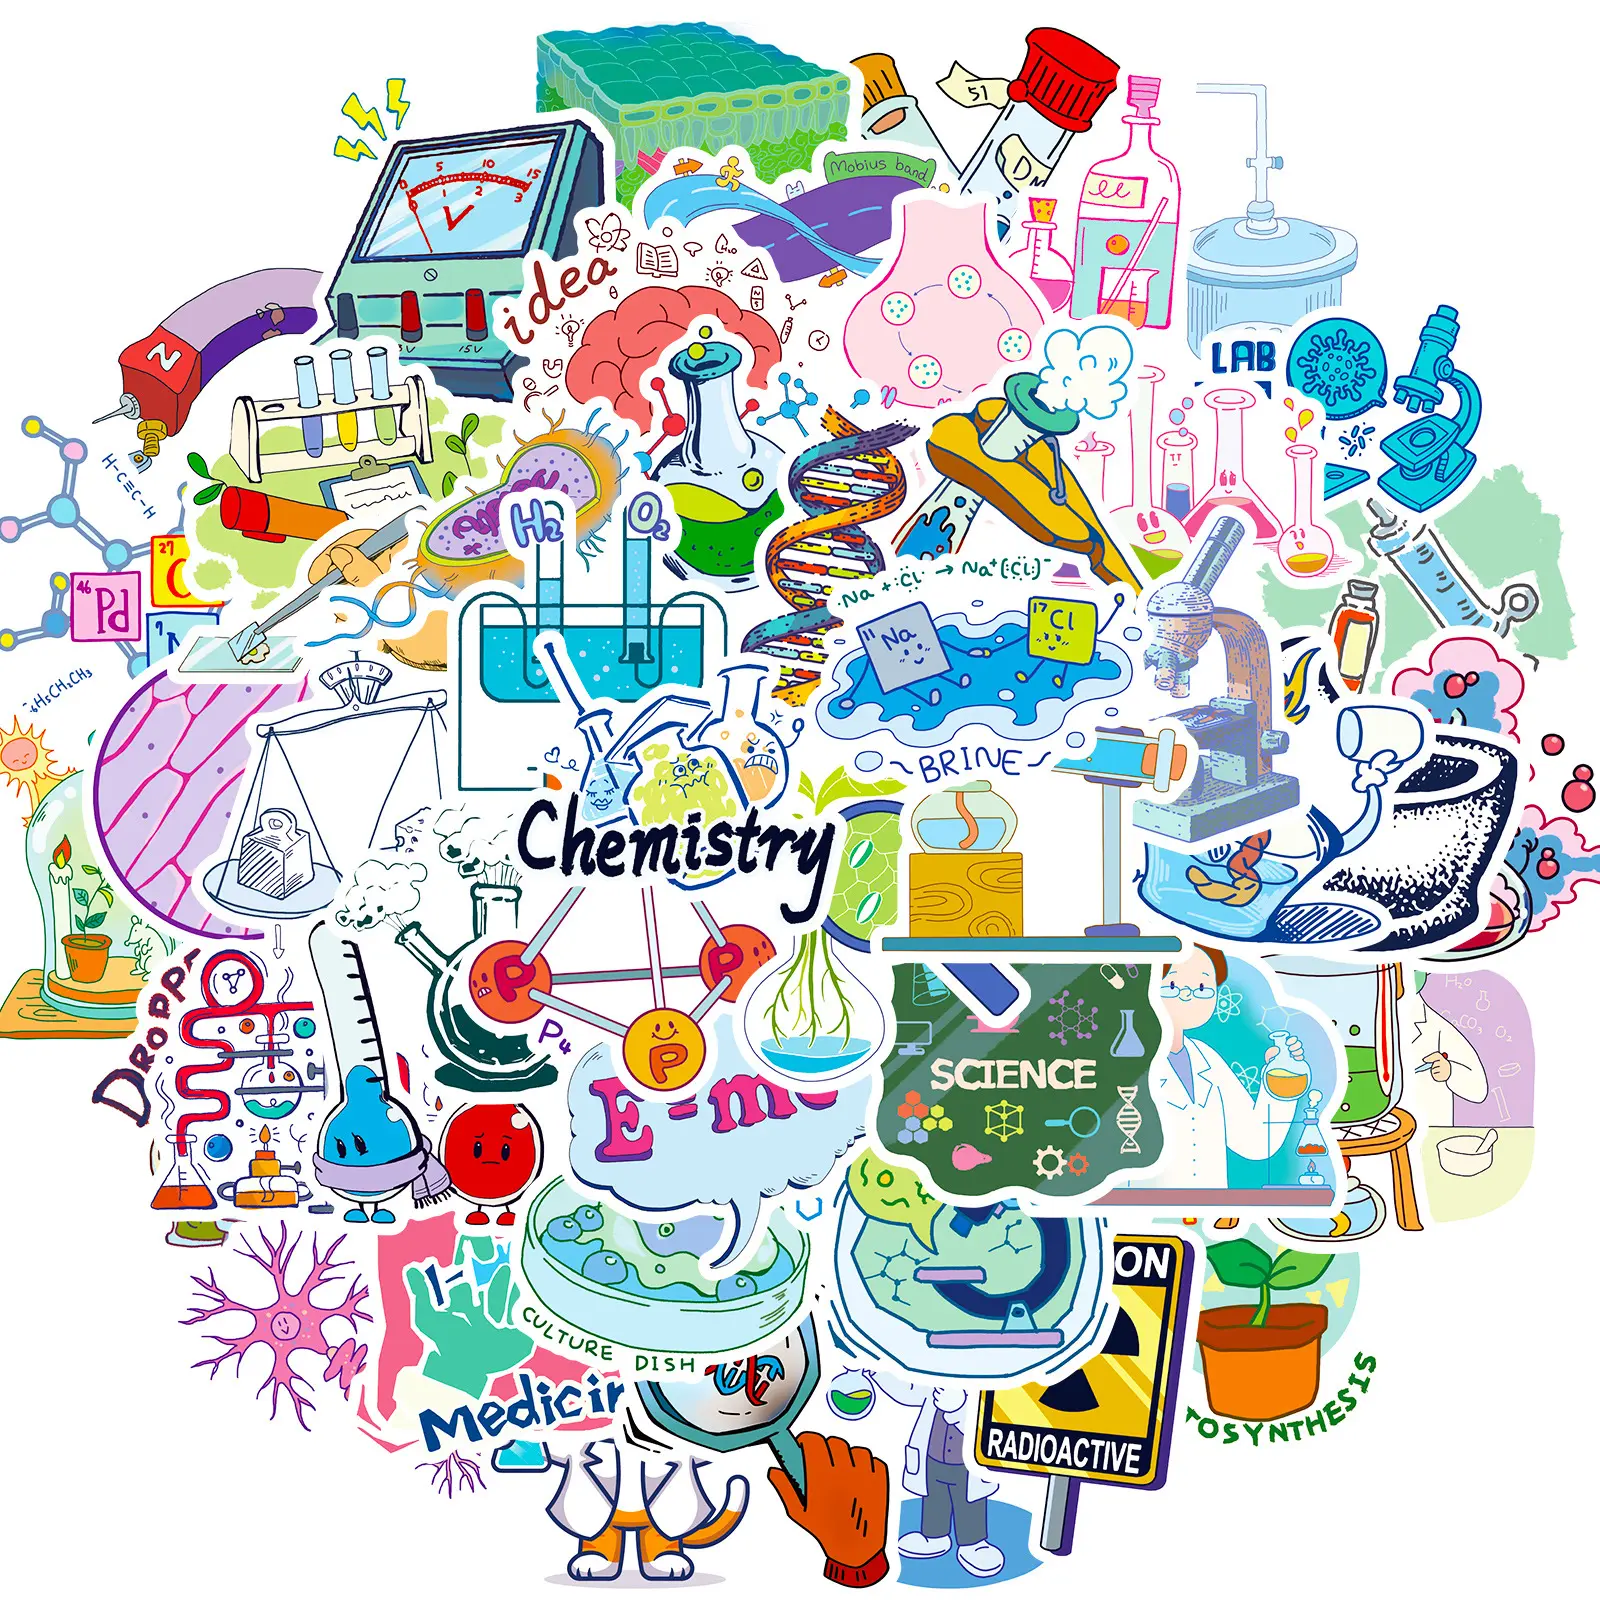 50pcs Chemical Lab Science Graffiti Stickers Luggage Tablet Stickers Decorative for Book Laptop Phone Skateboard Water Cup